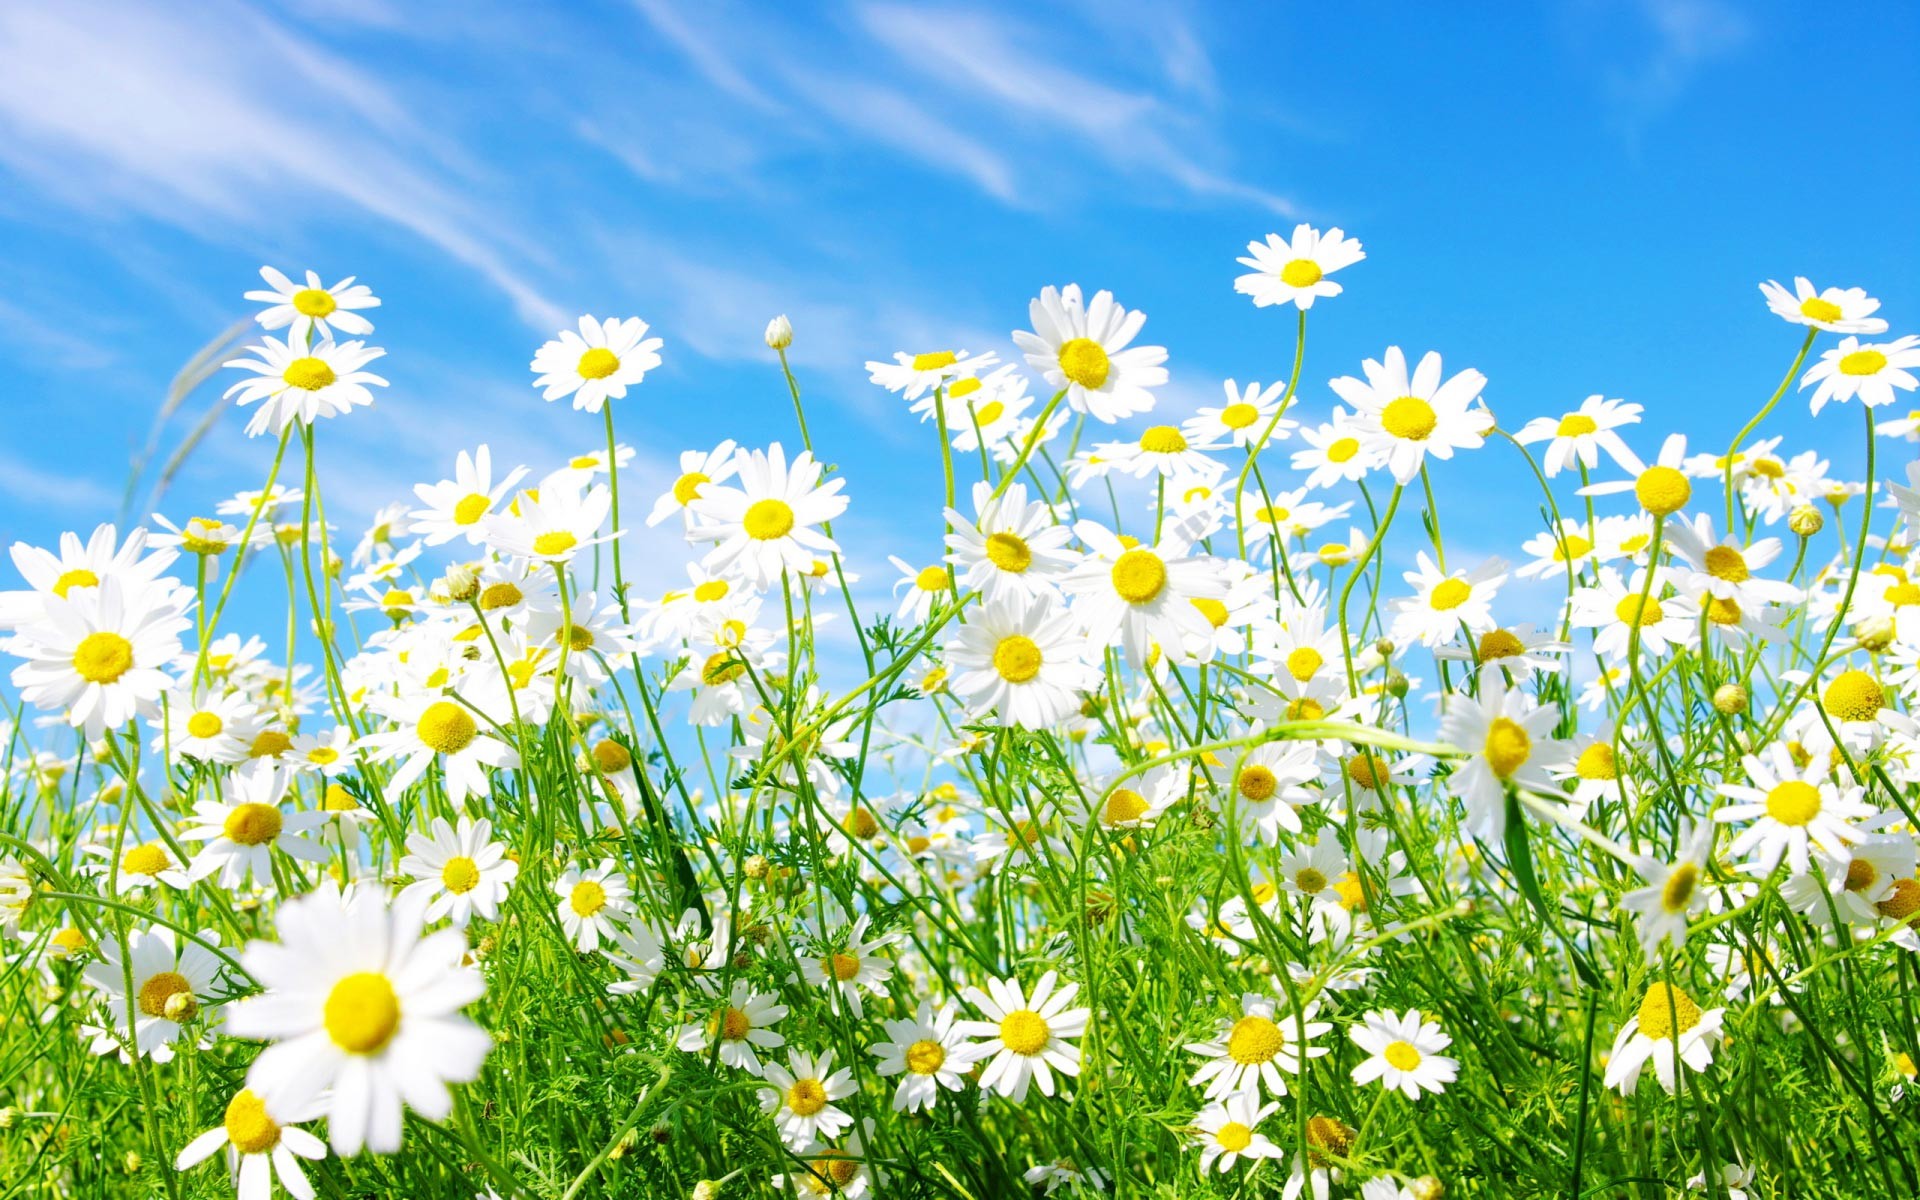 1920x1200 Related Wallpapers from Springtime Wallpaper. Colors White Daisy Wallpaper